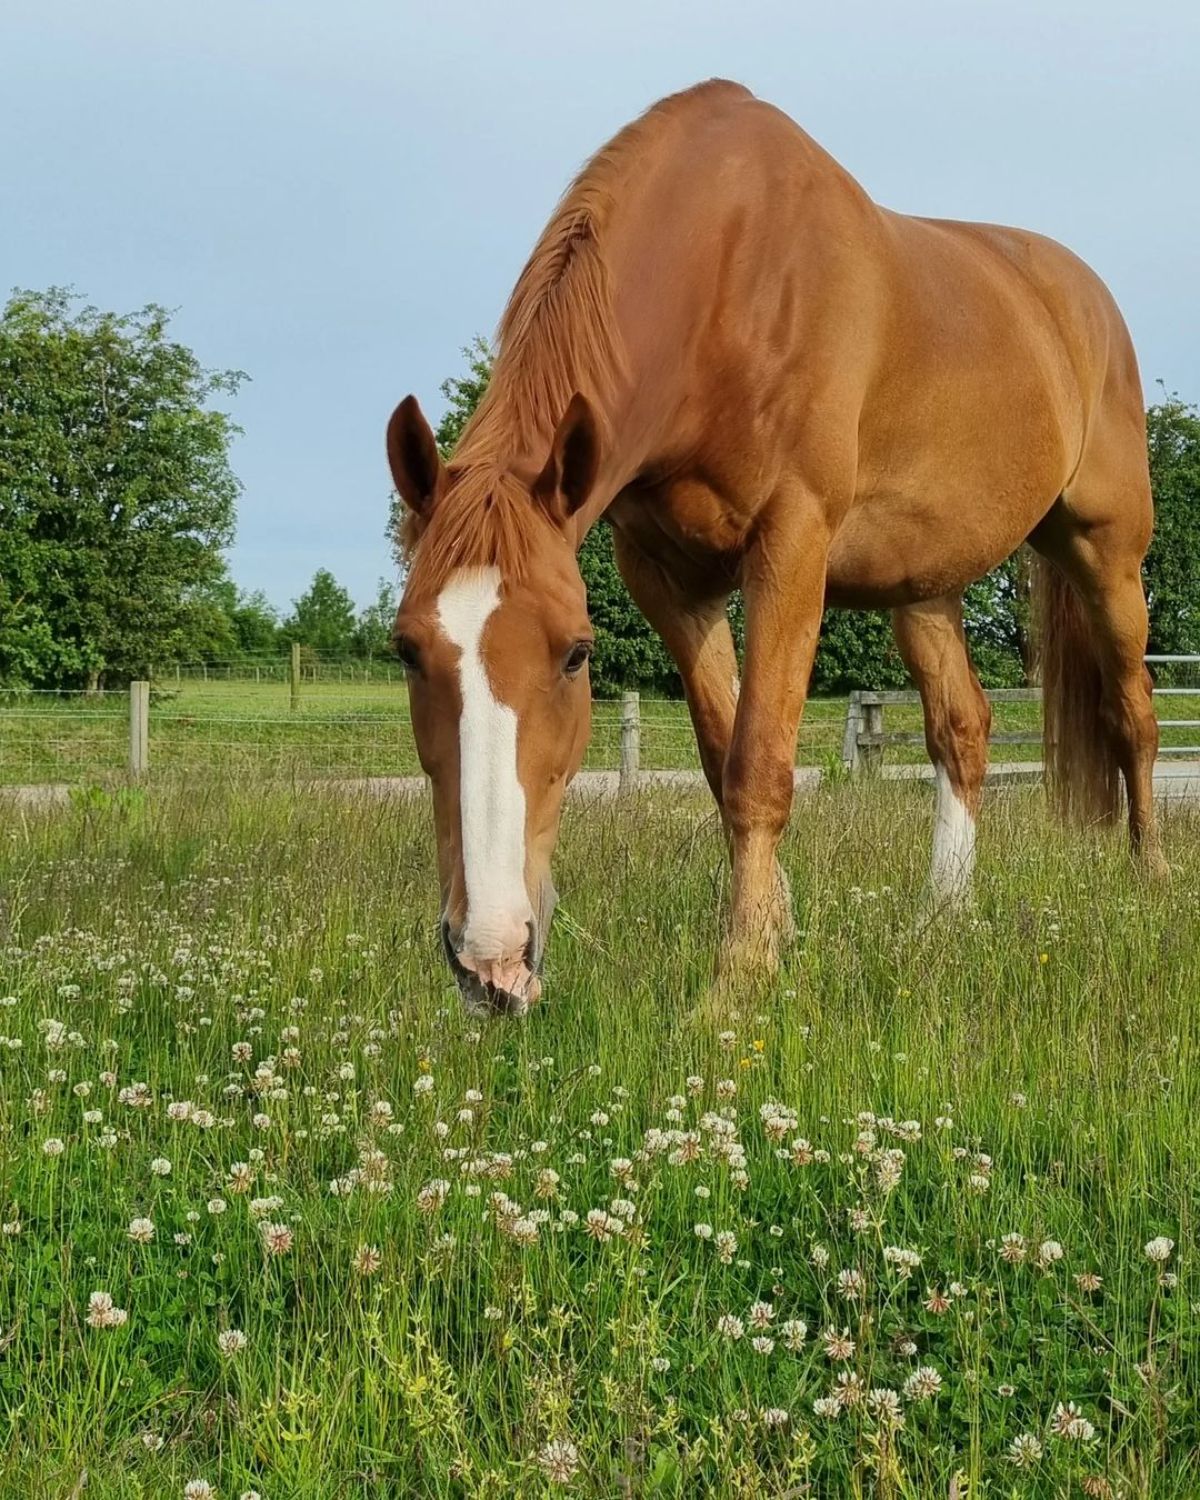 A light chestnut horse stands in a meadow and eats grass.